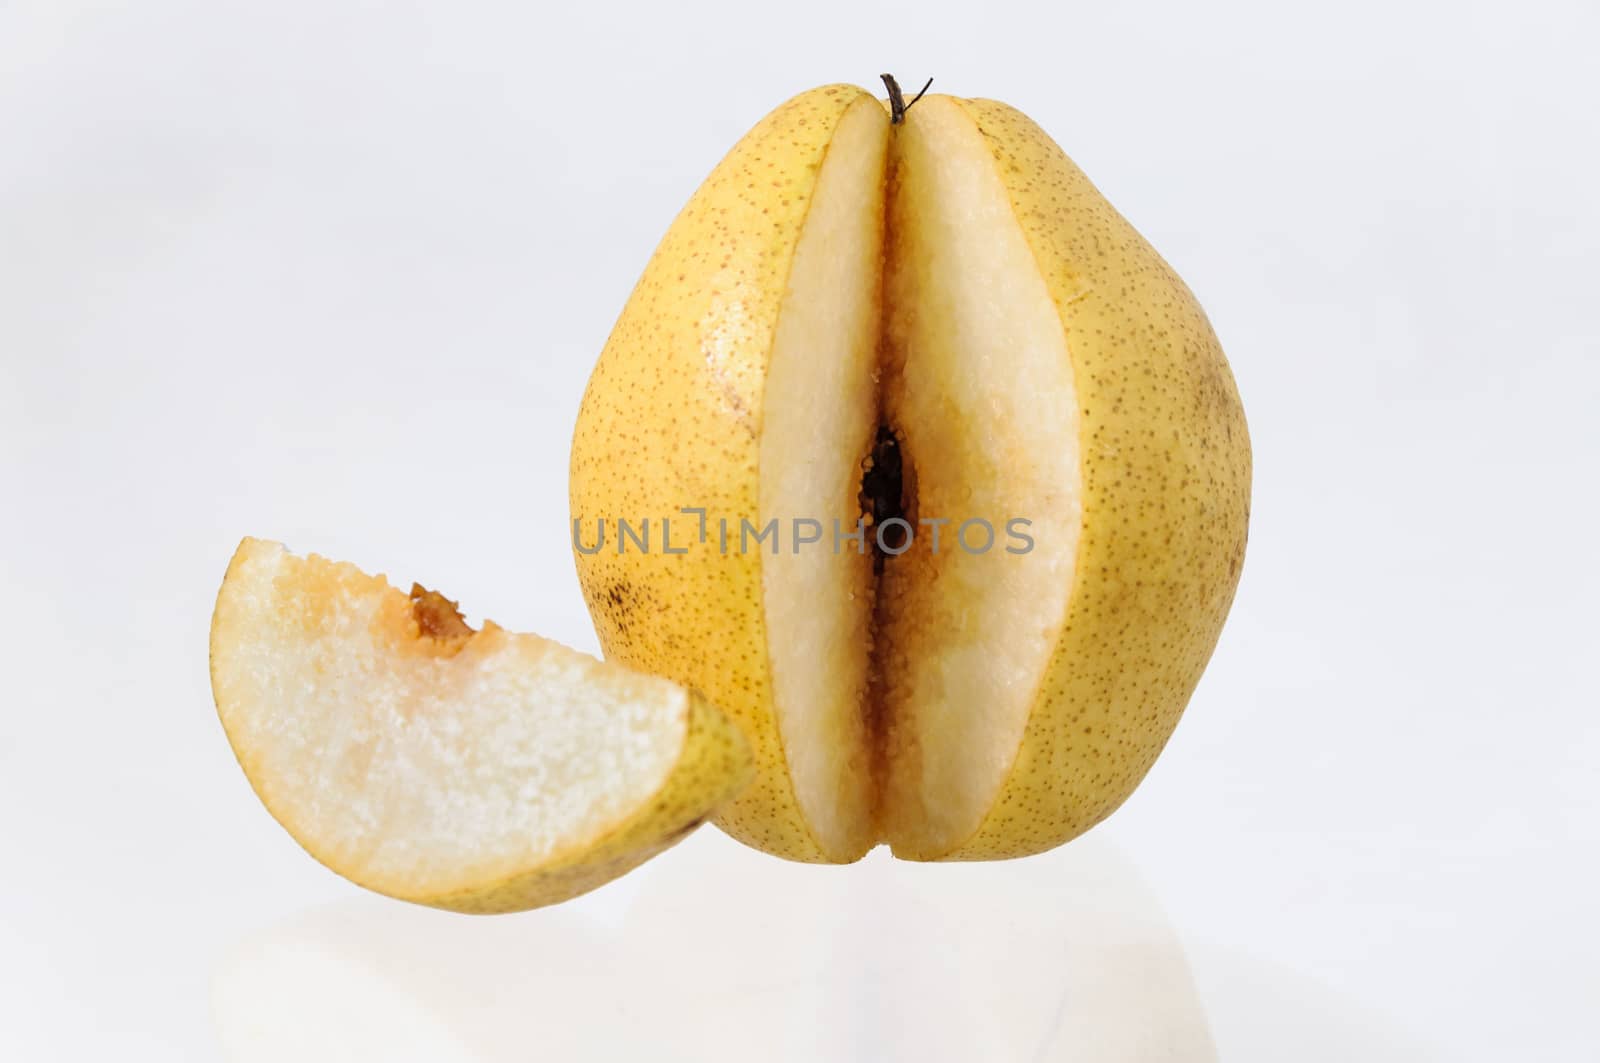 Chinese pear isolated on white background